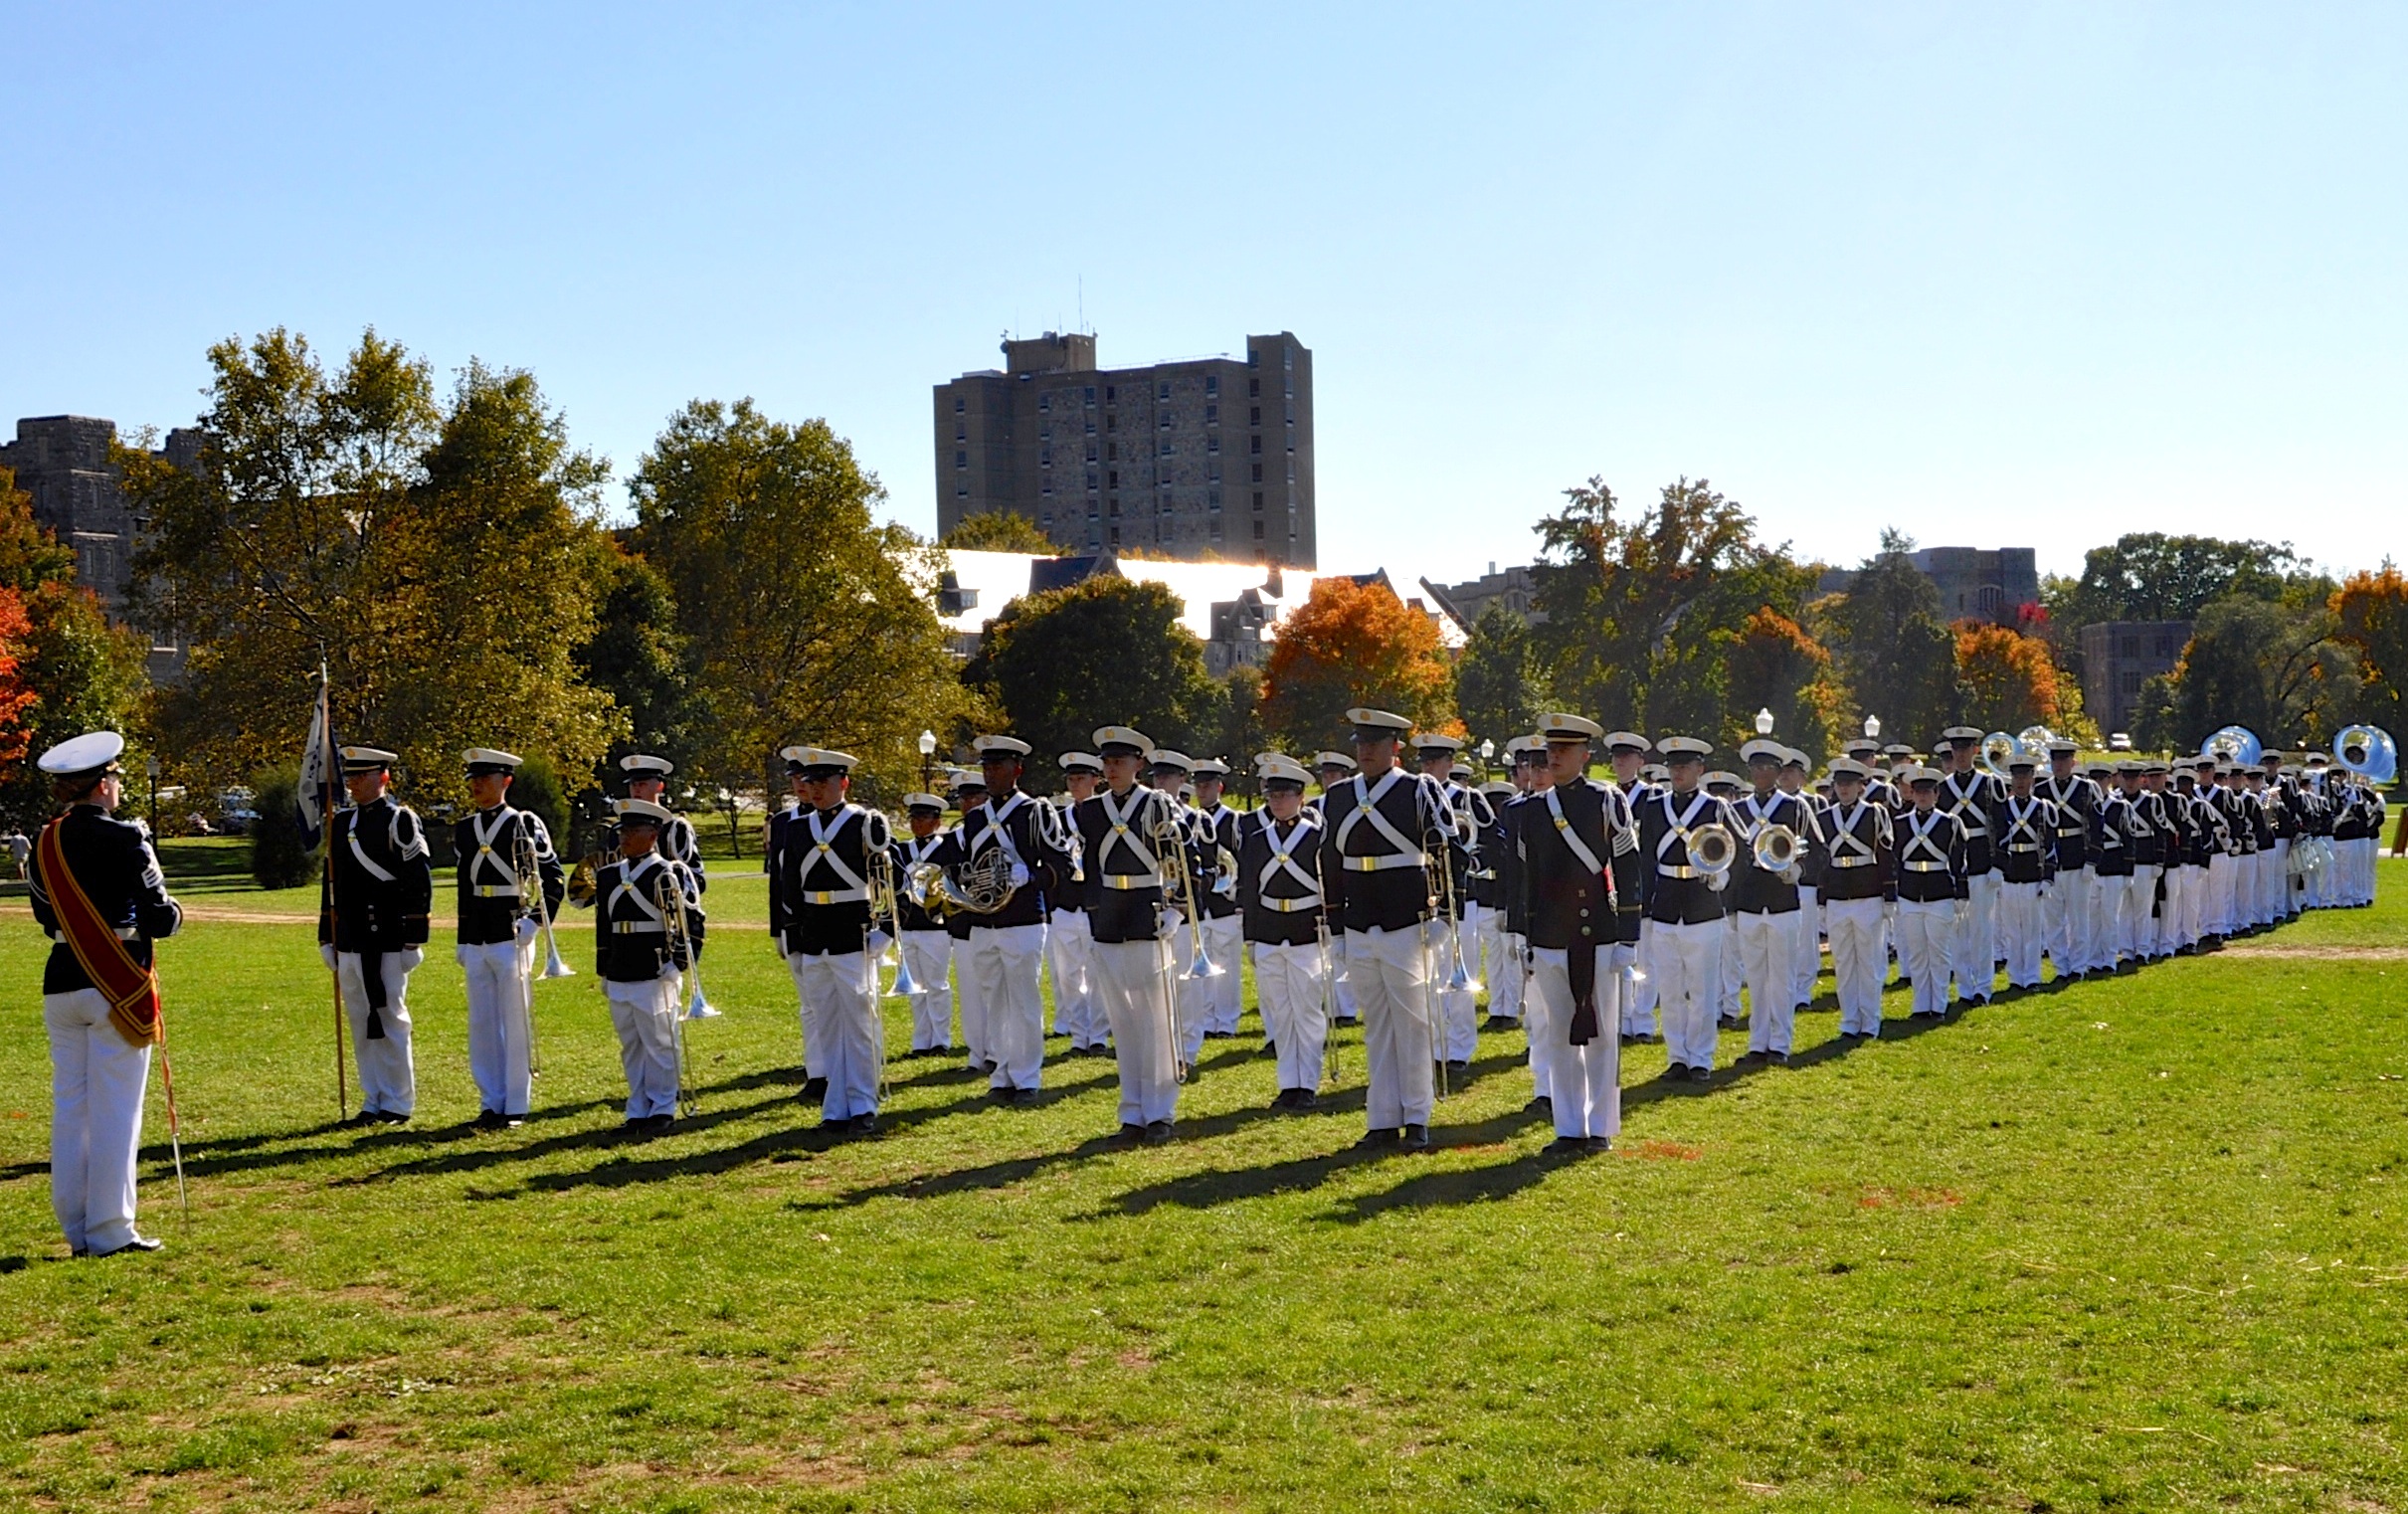 The Virginia Tech Corps of Cadets regimental band, the Highty-Tighties on the Drillfield.